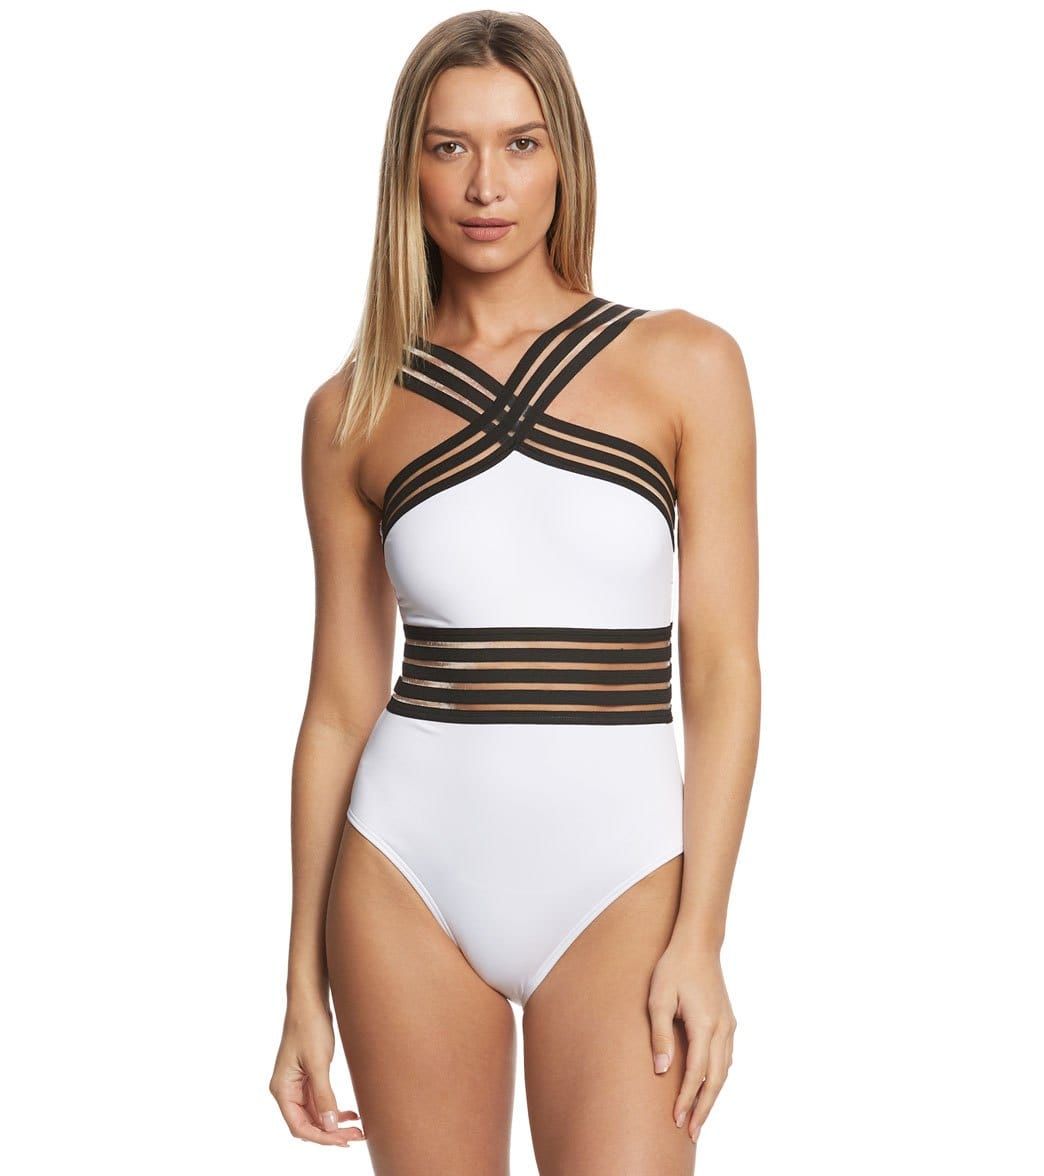 Kenneth Cole Stompin' In My Stilettos High Neck One Piece Swimsuit - White Large Nylon/elastane - Swimoutlet.com | SwimOutlet.com